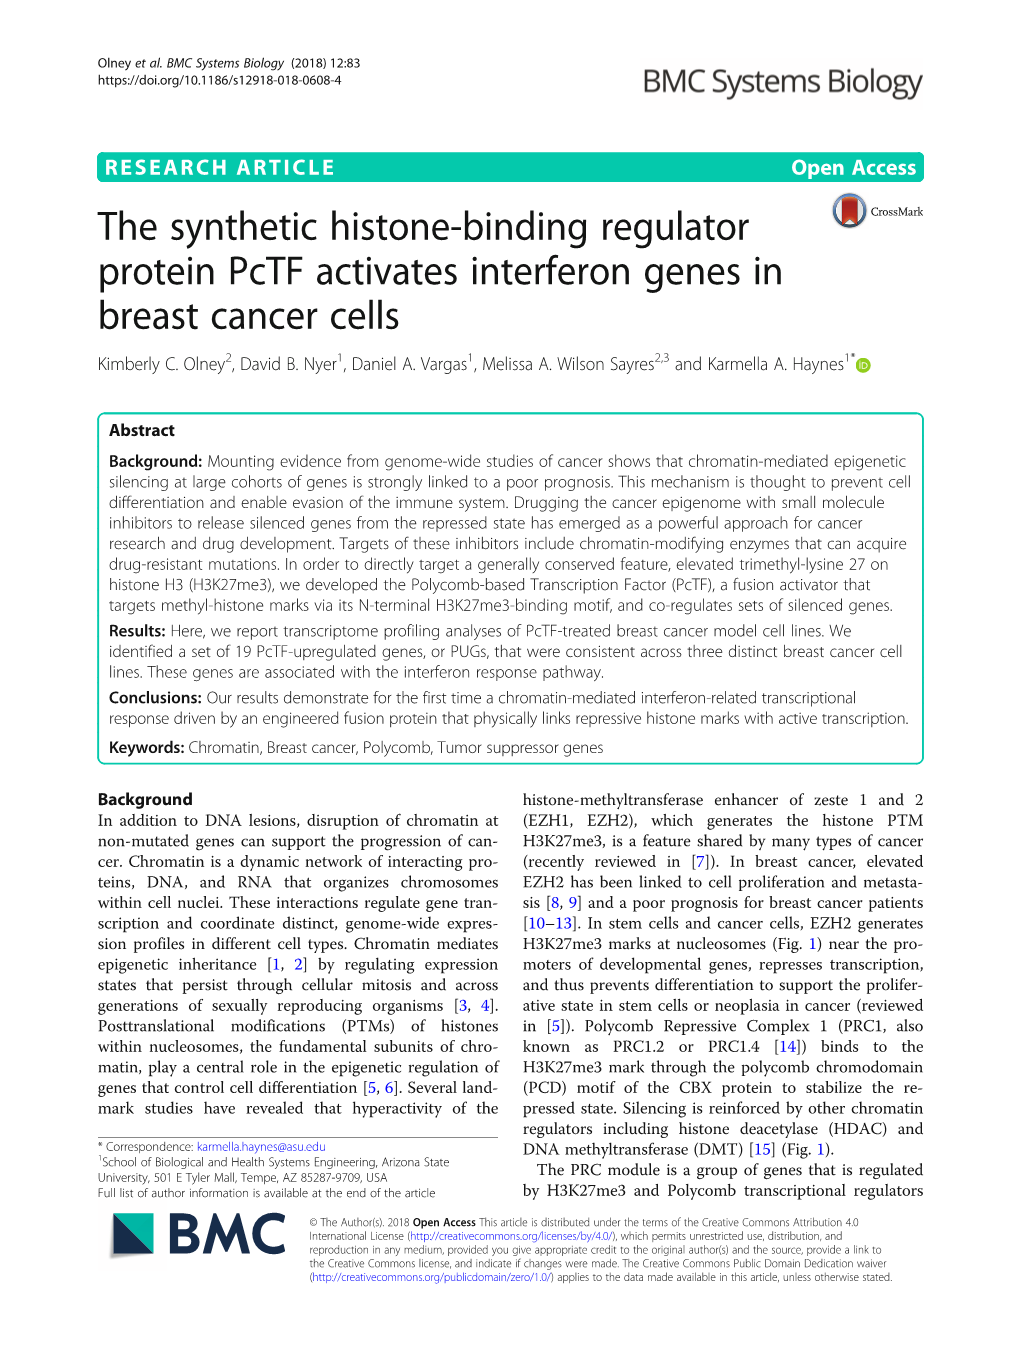 The Synthetic Histone-Binding Regulator Protein Pctf Activates Interferon Genes in Breast Cancer Cells Kimberly C